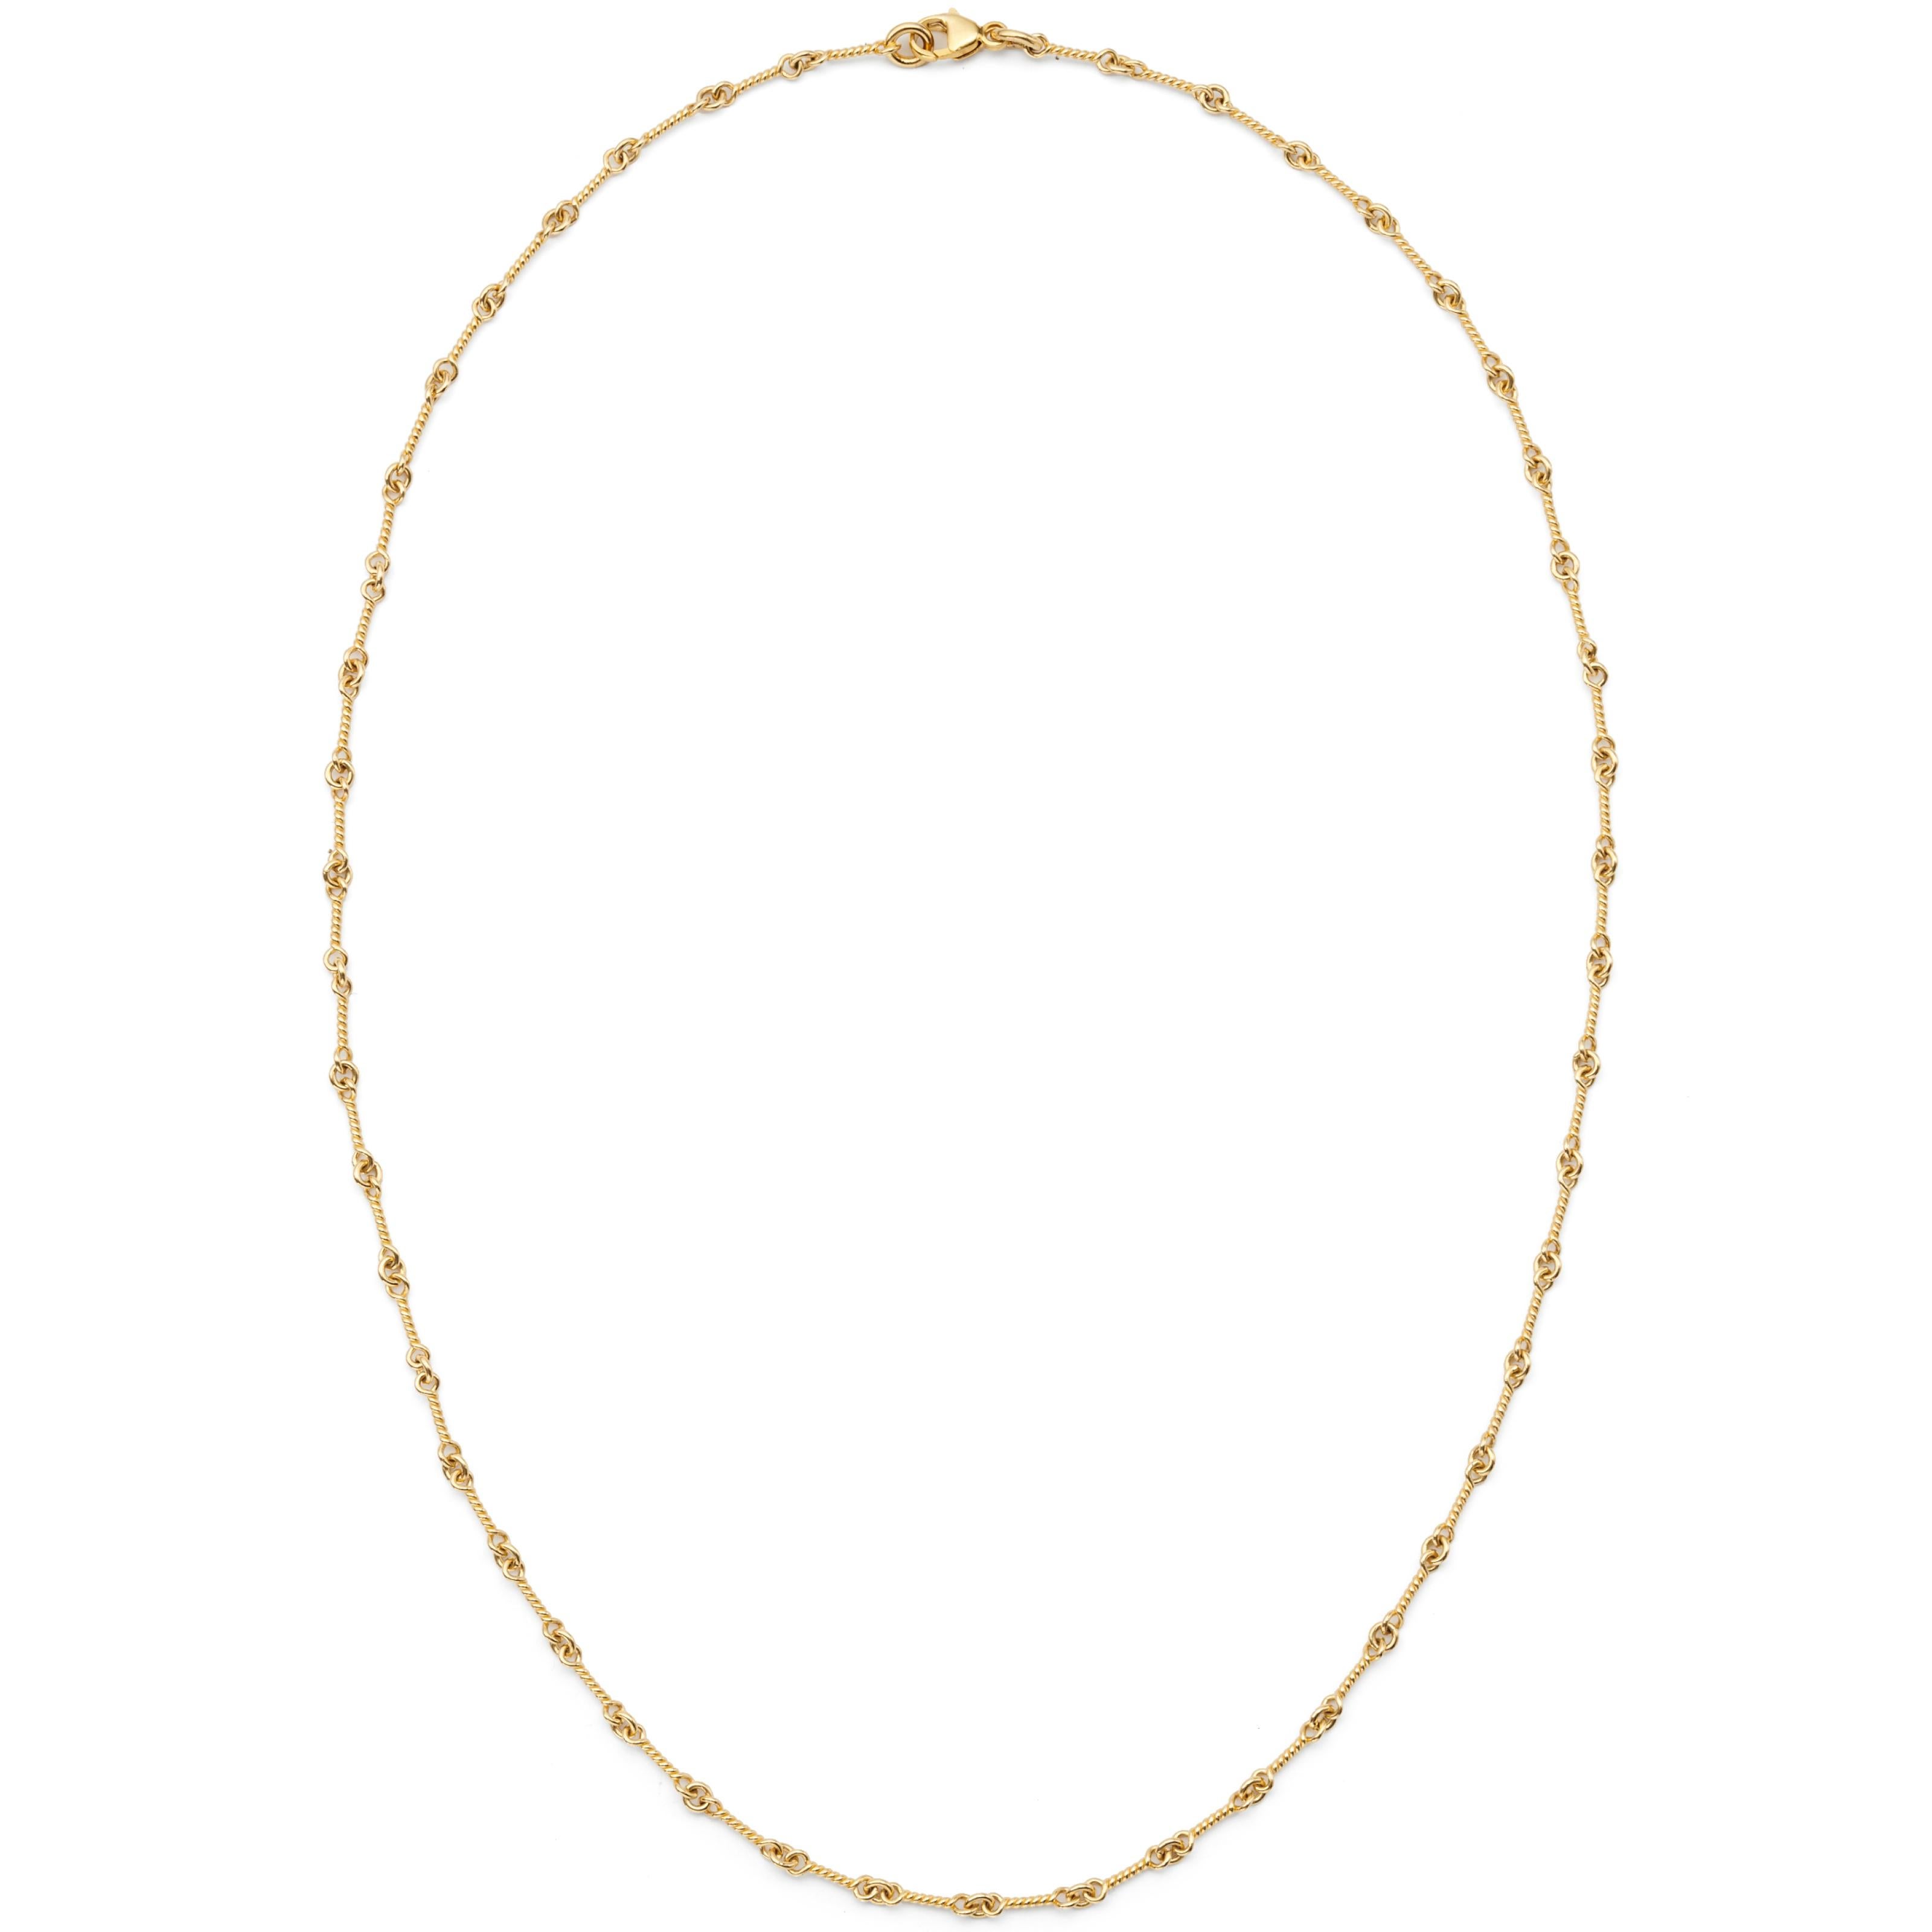 Susan Lister Locke Twist Chain in 18kt Gold In New Condition For Sale In Nantucket, MA